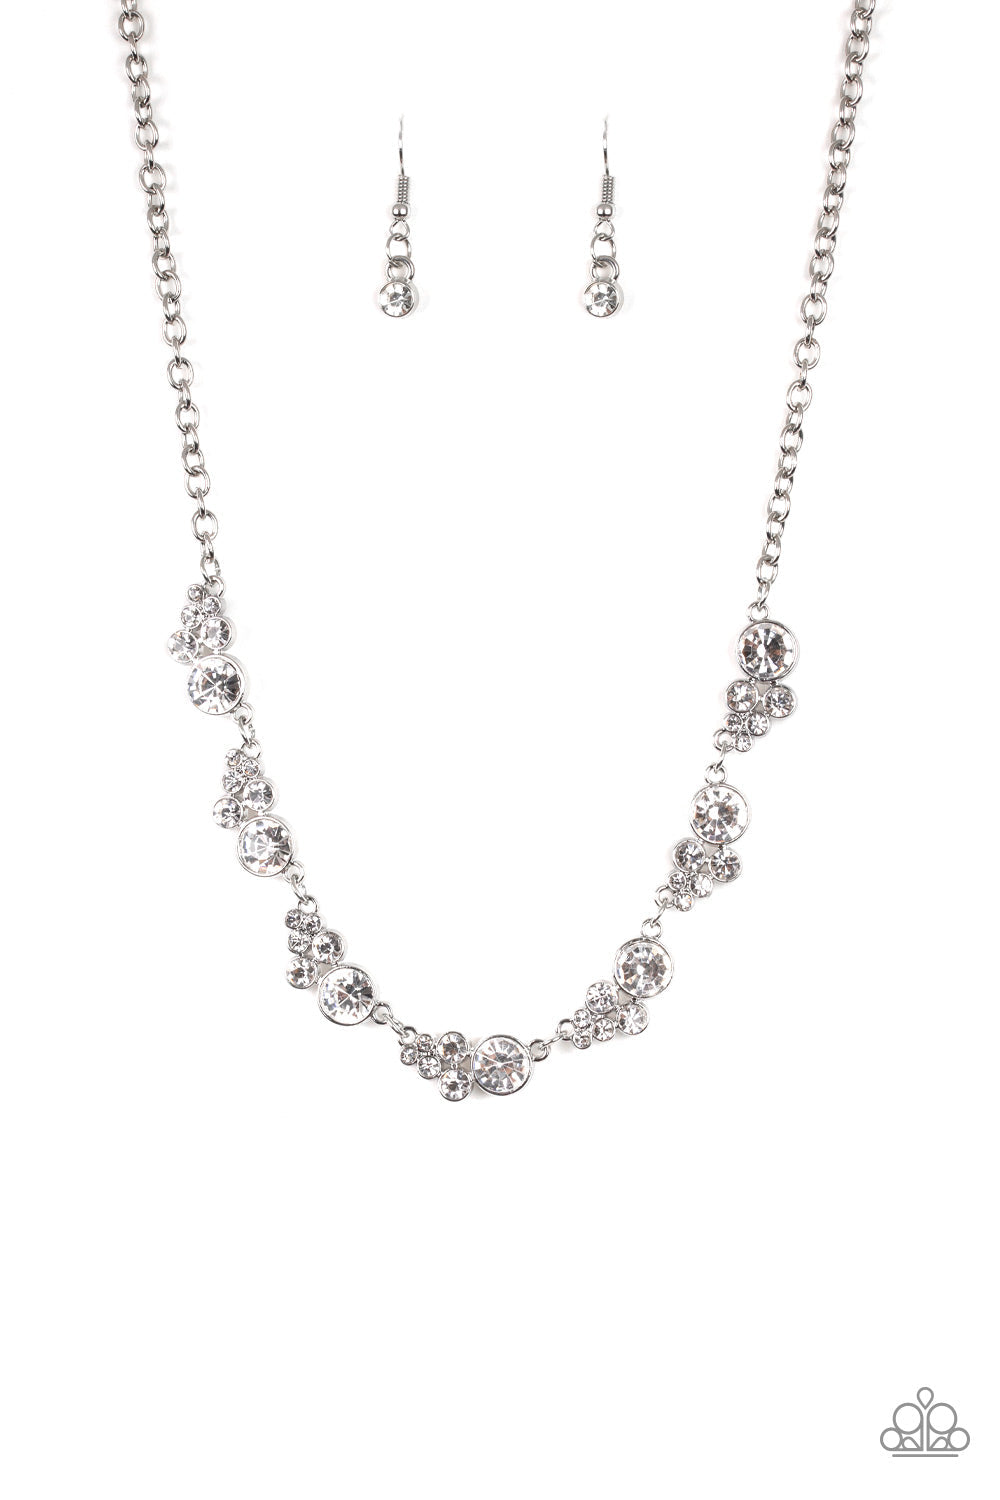 Social Luster - White and Silver Necklace - Paparazzi Jewelry  - Bejeweled Accessories By Kristie - A collection of glassy white rhinestones coalesce into glittery silver frames as they link below the collar for a timeless shimmer fashion necklace.